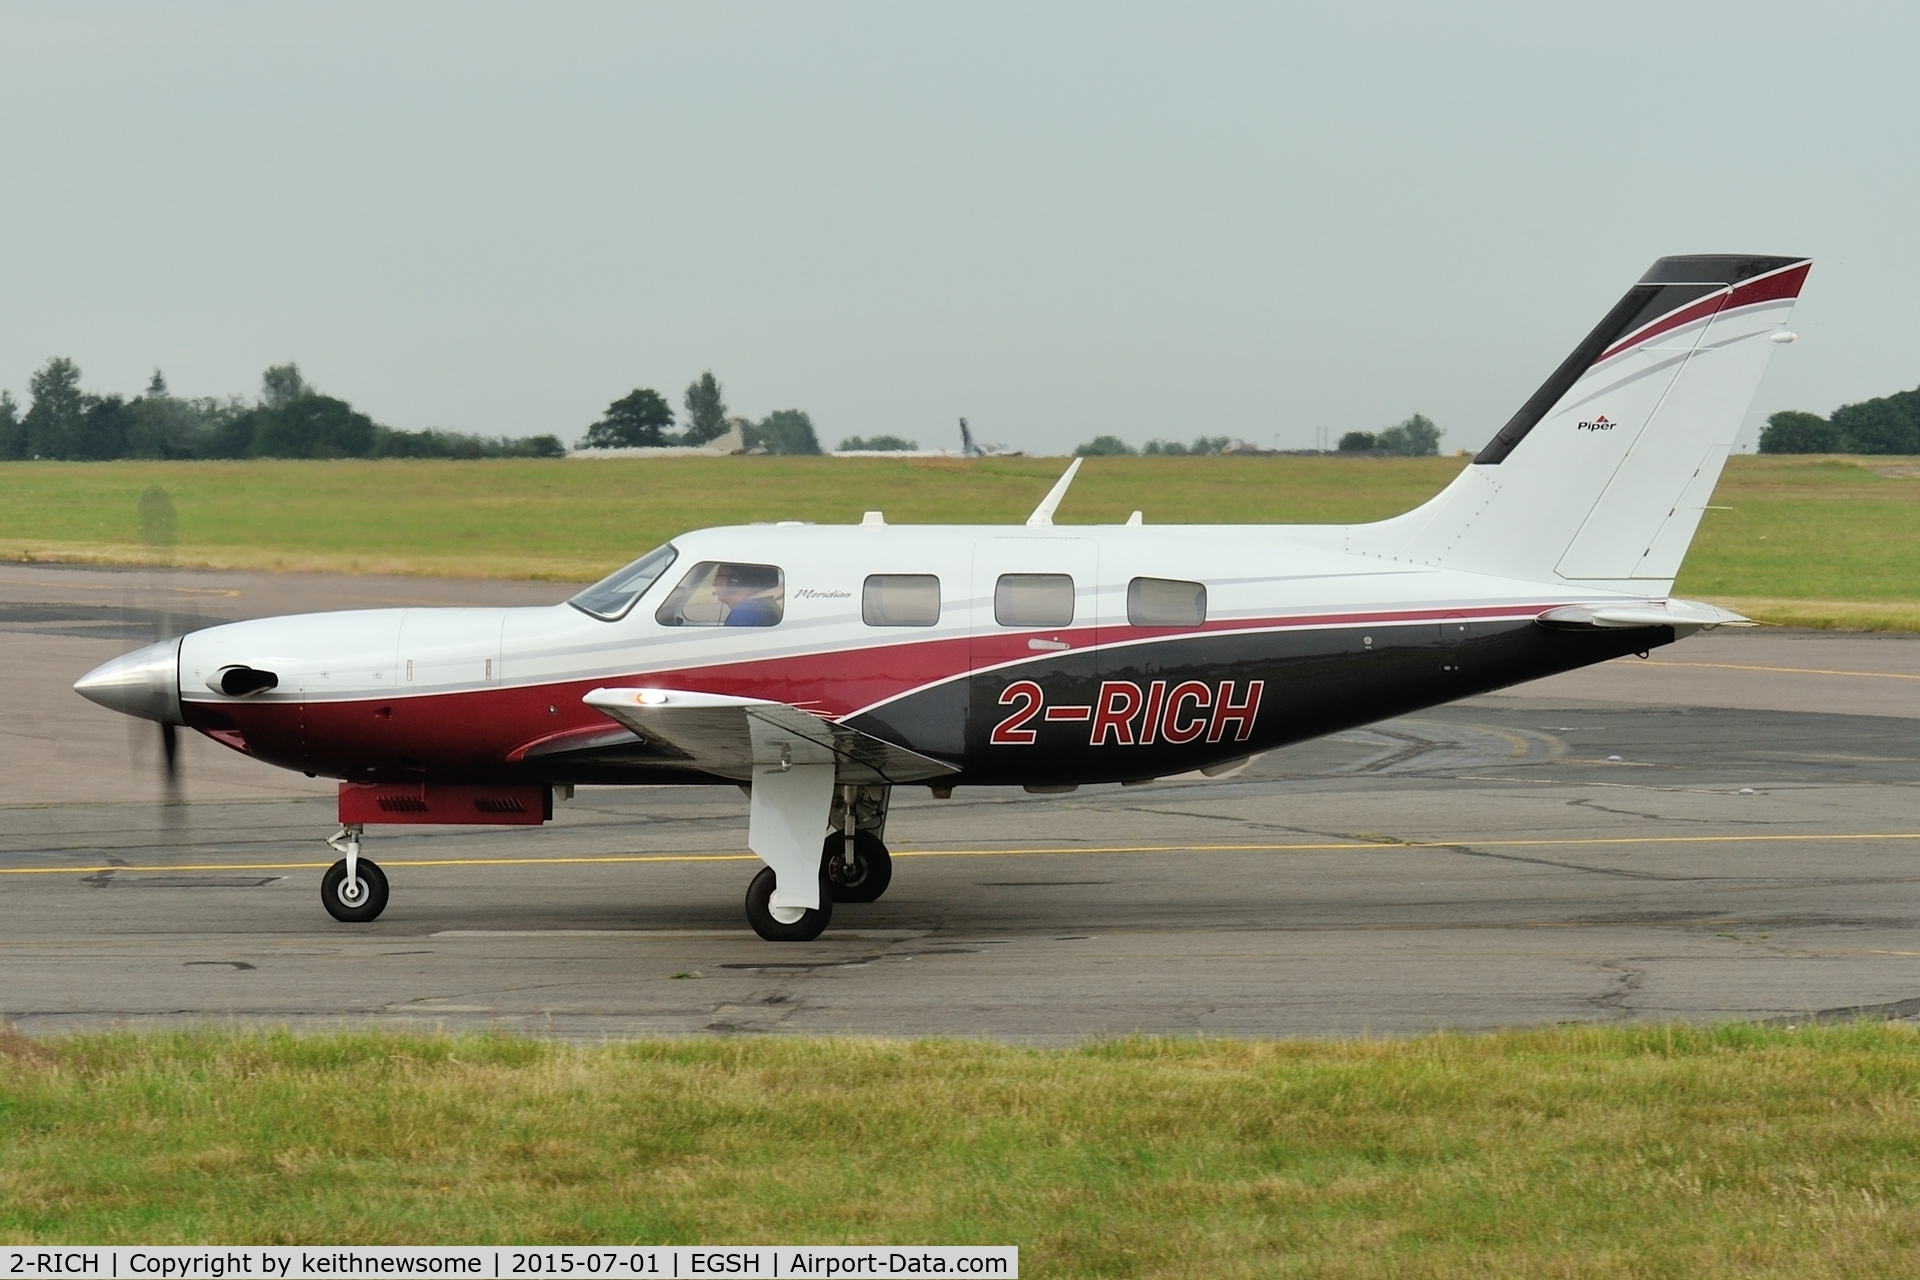 2-RICH, 2010 Piper PA-46-500TP Malibu Meridian C/N 4697425, Registration is now this Piper PA-46 Malibu.Formerly M-OOSE.